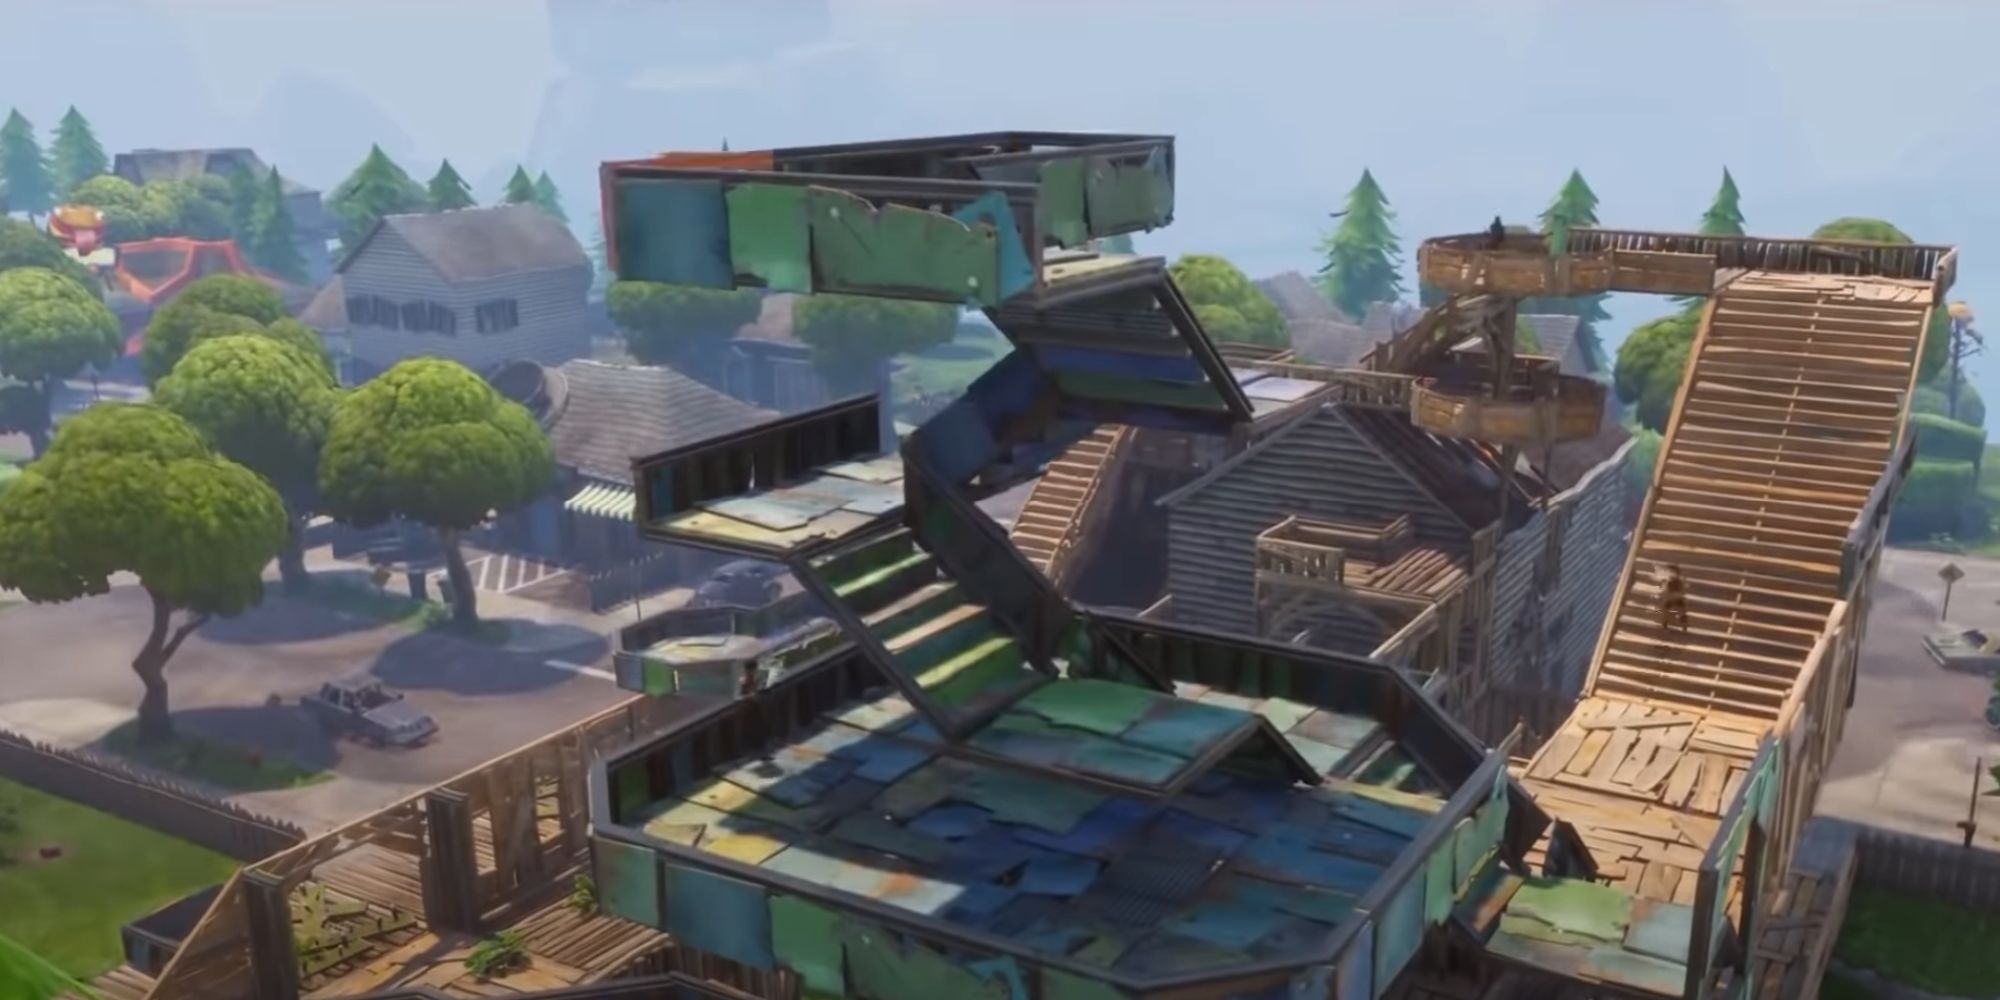 Fortnite Characters Building Upward In Save The World